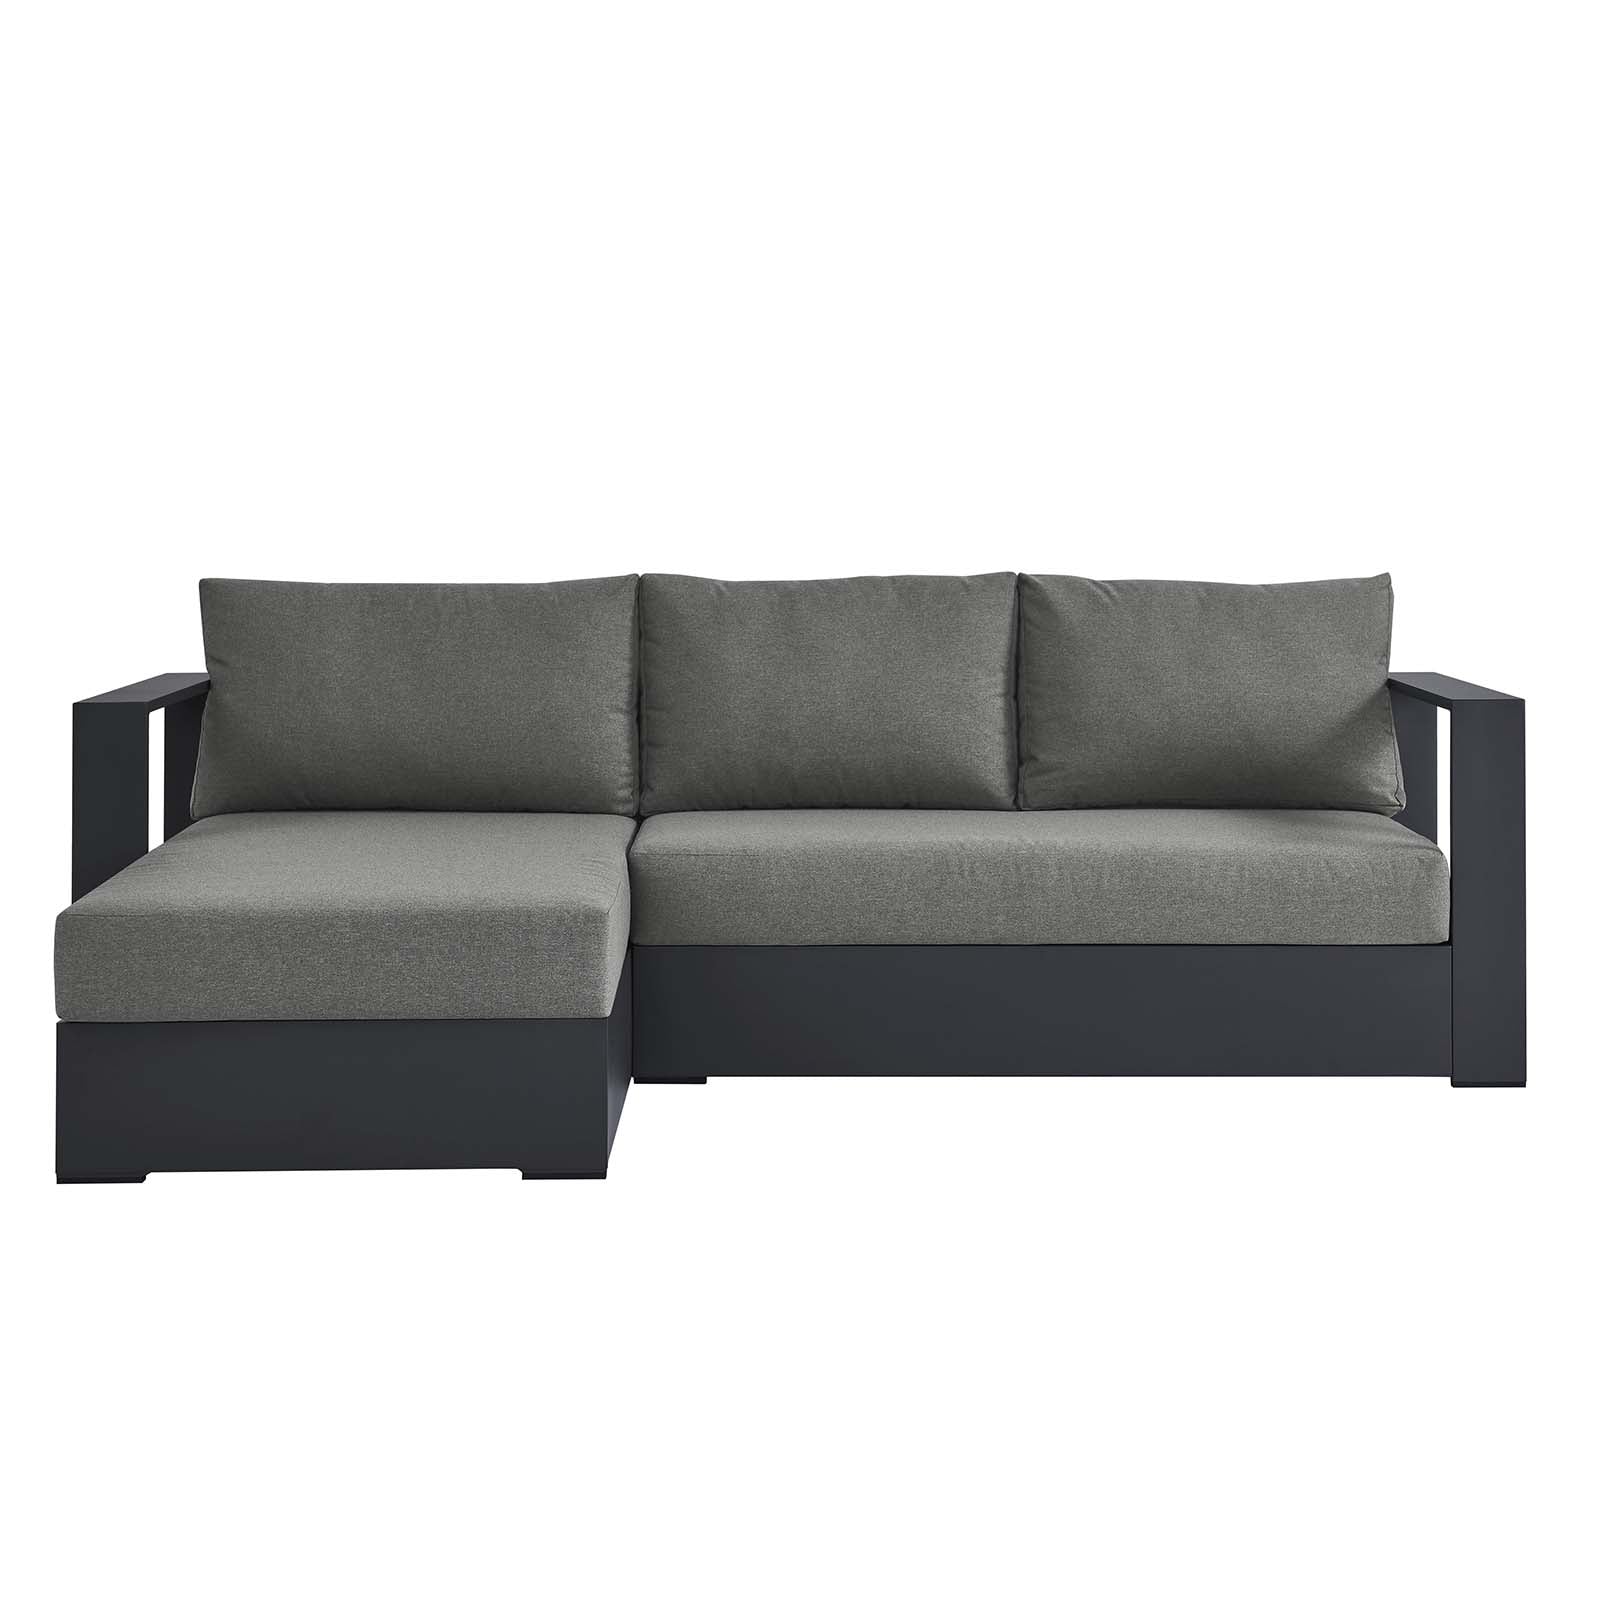 Tahoe Outdoor Patio Powder-Coated Aluminum 2-Piece Left-Facing Chaise Sectional Sofa Set - East Shore Modern Home Furnishings